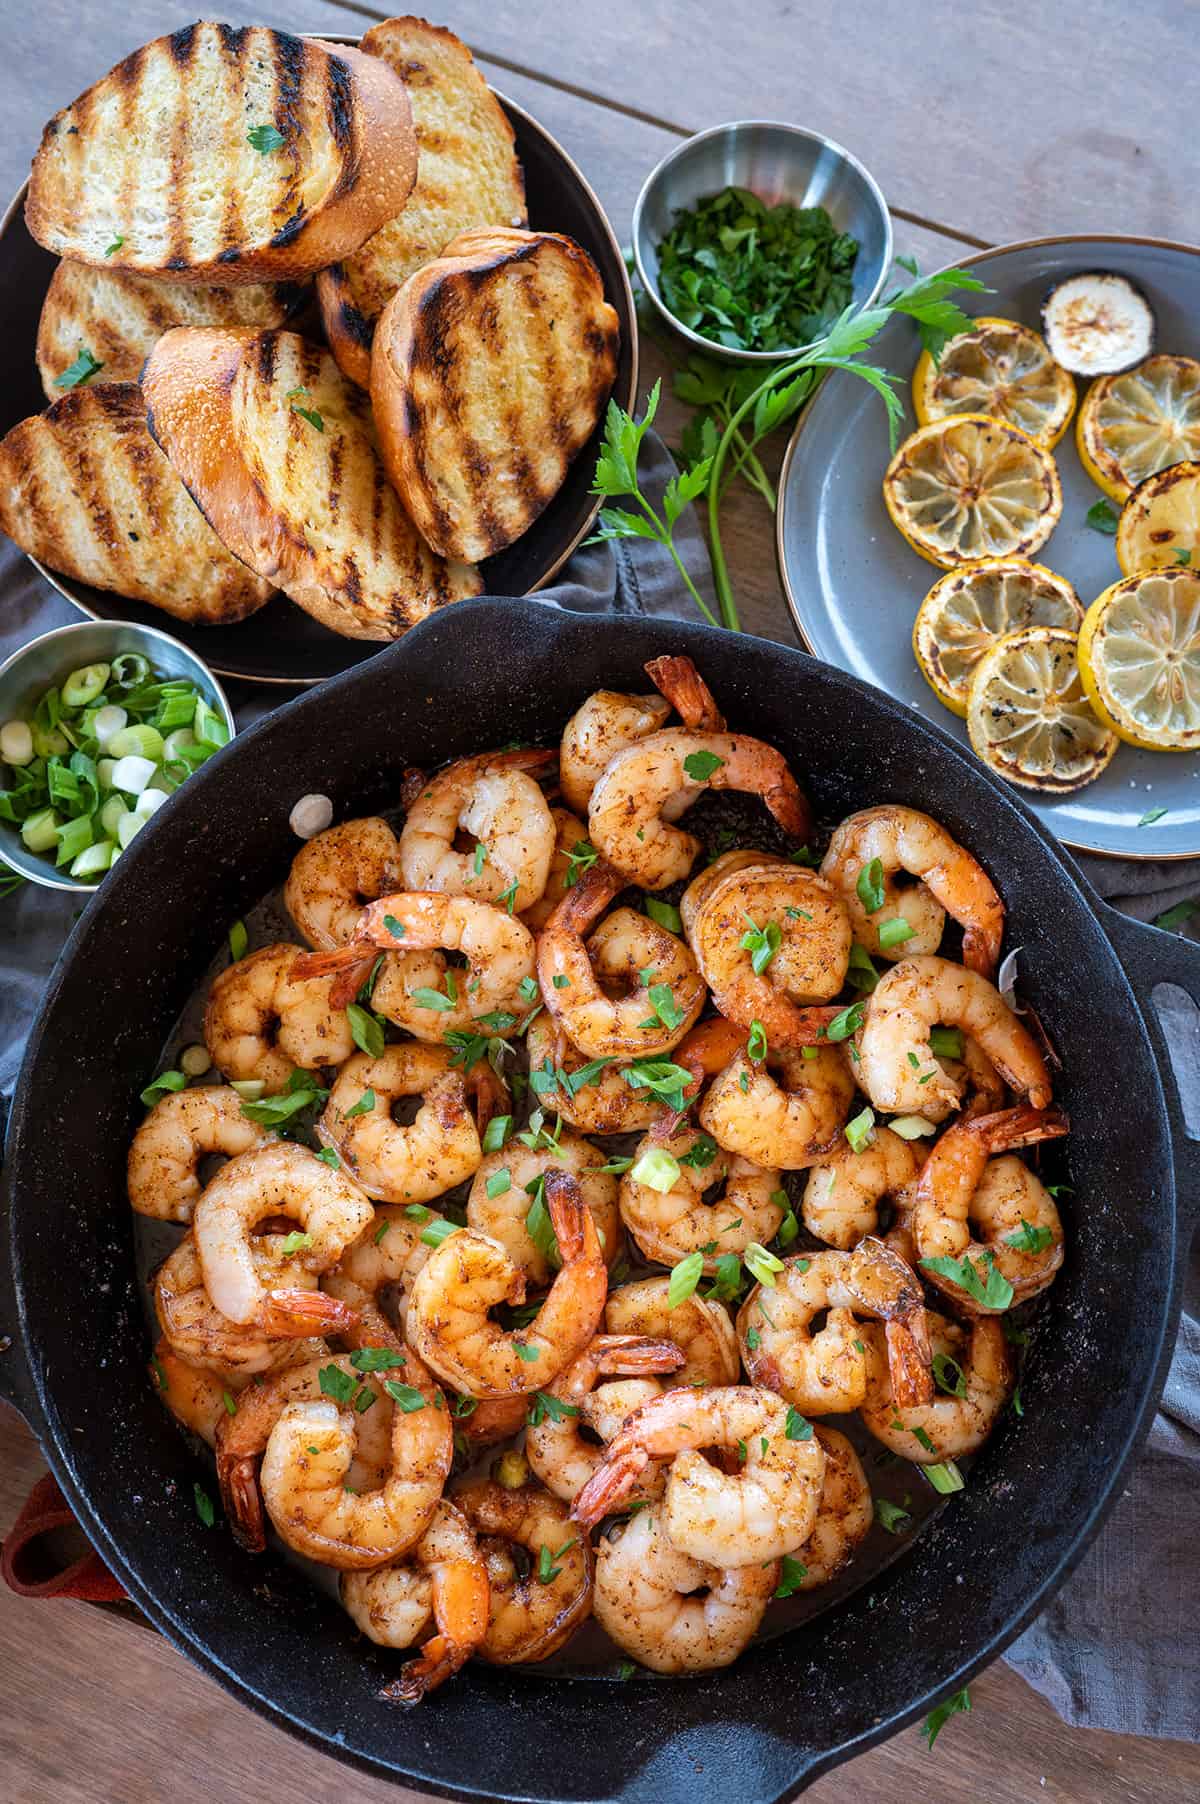 Cast iron skillet full of BBQ shrimp next to grilled bread and grilled lemon slices.